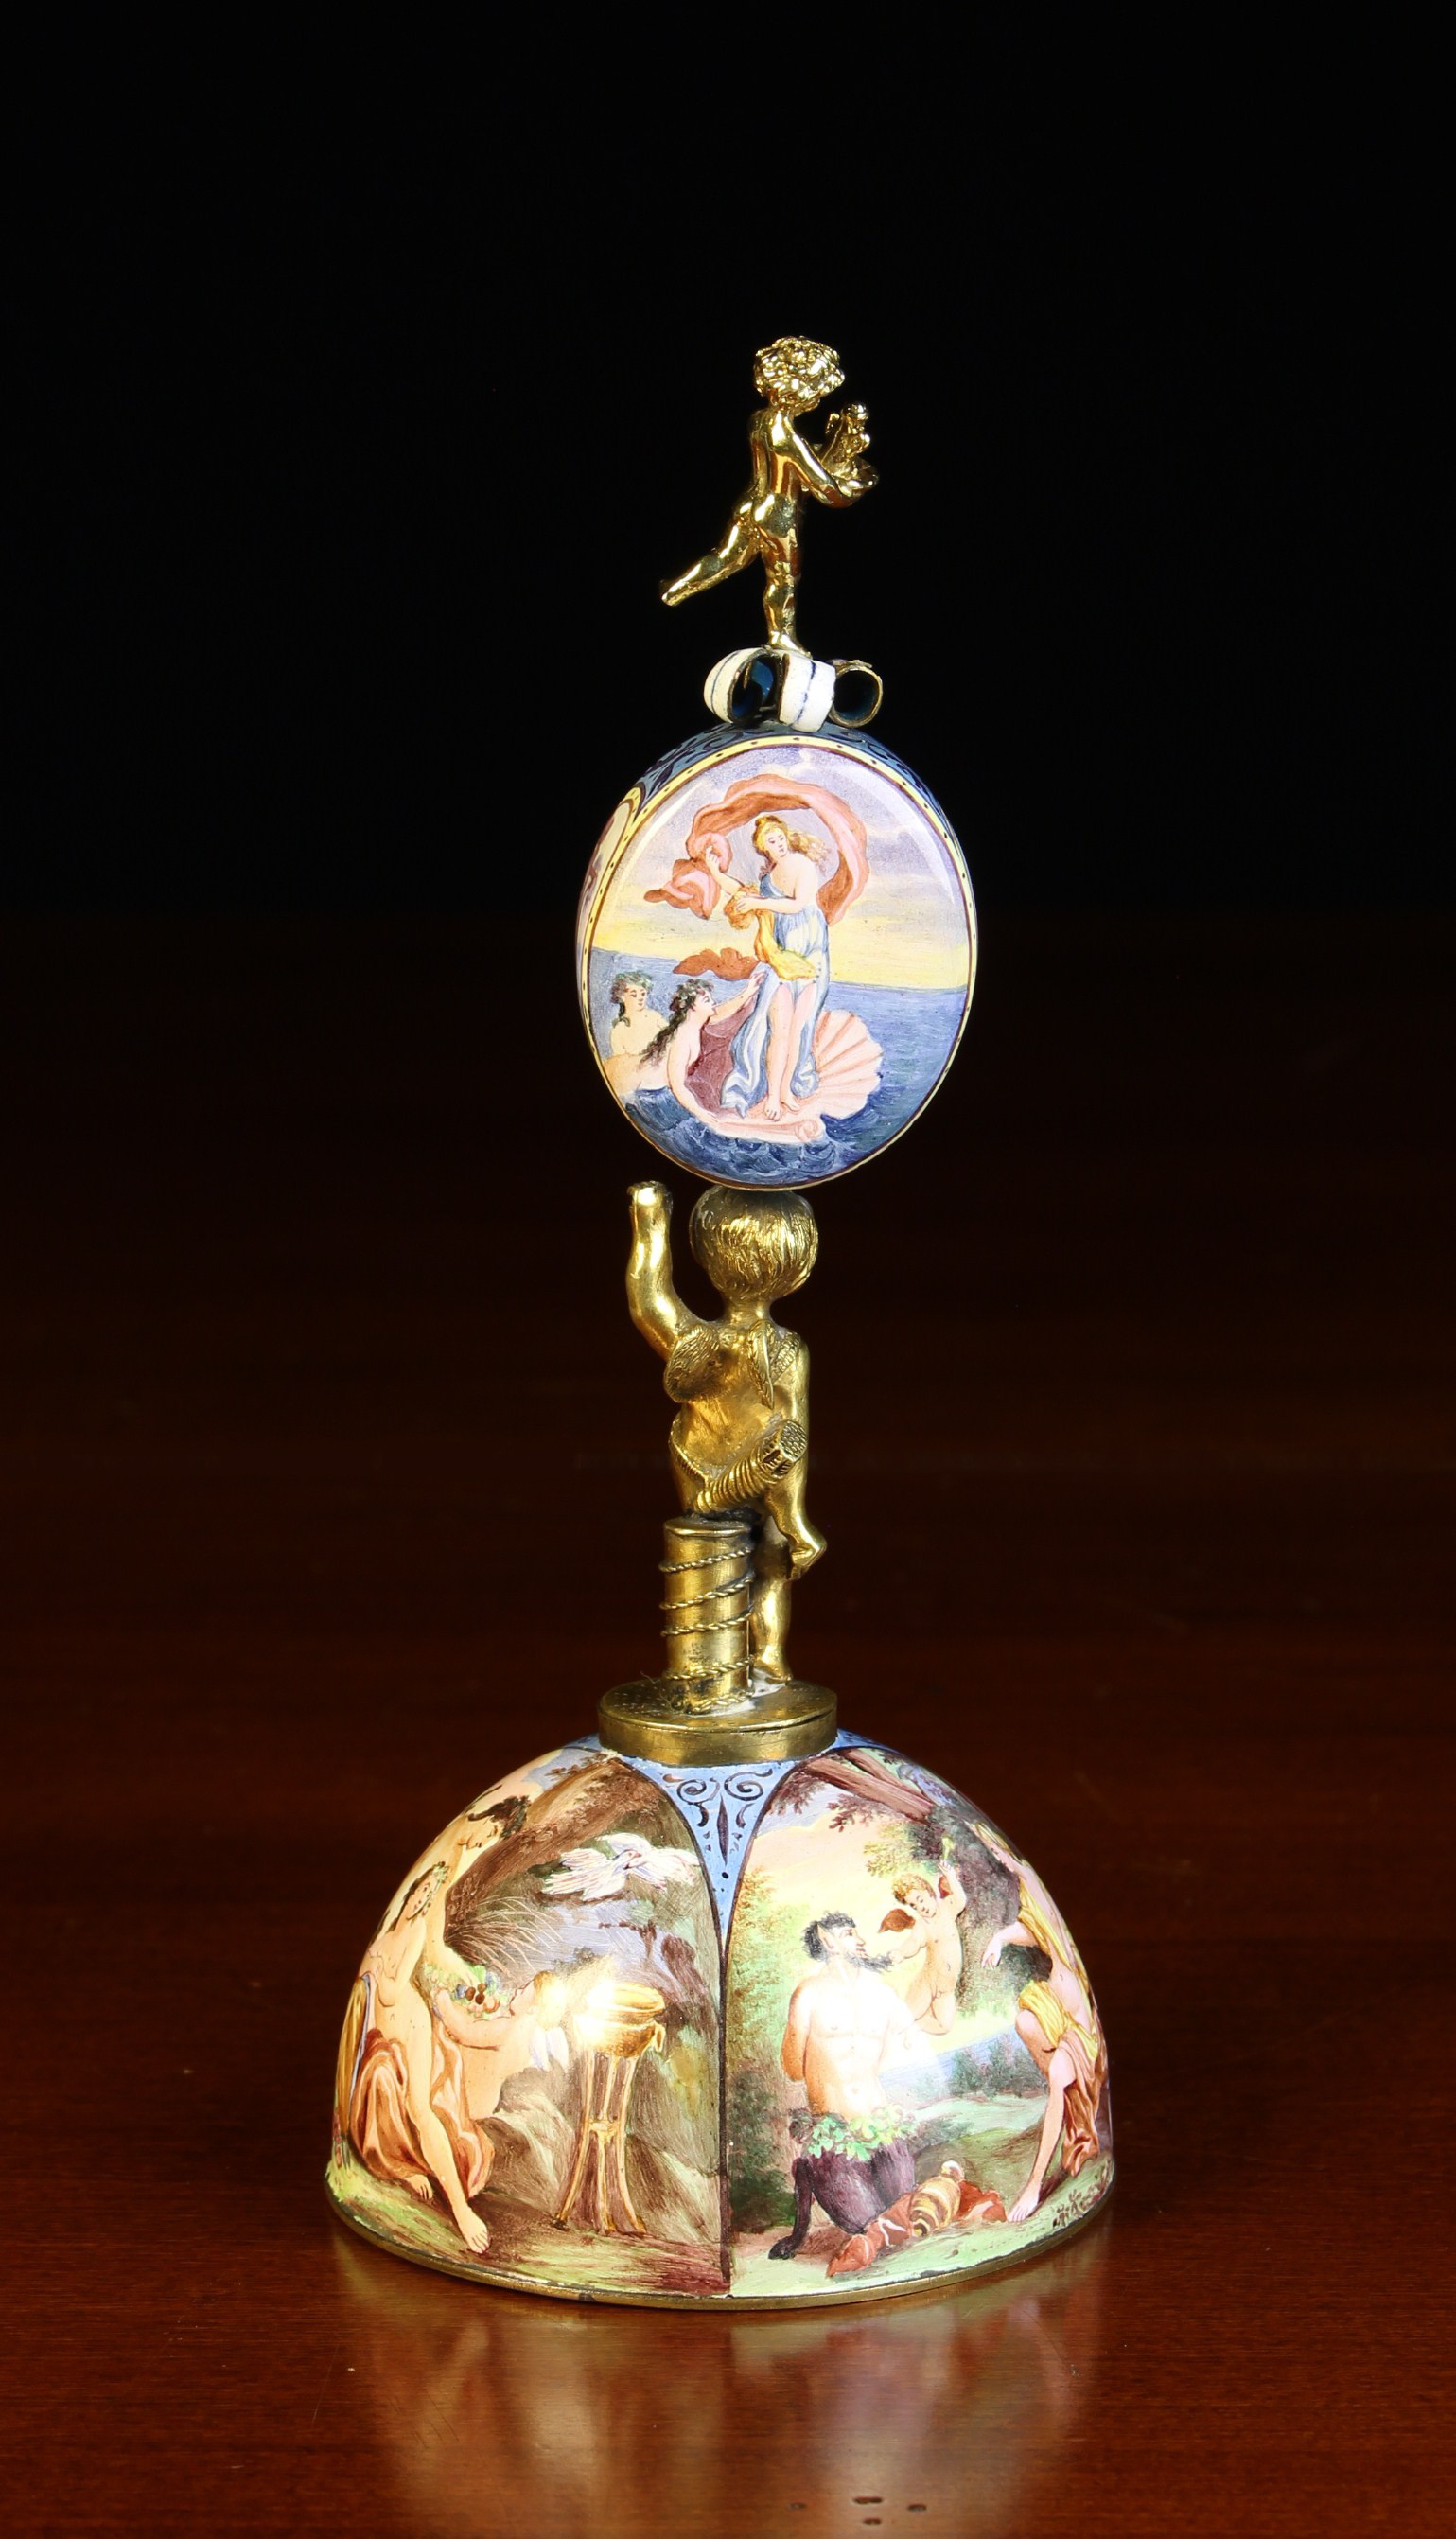 A Fine Late 19th Century Viennese Enamel & Gilt Bronze Figural Table Clock. - Image 3 of 4